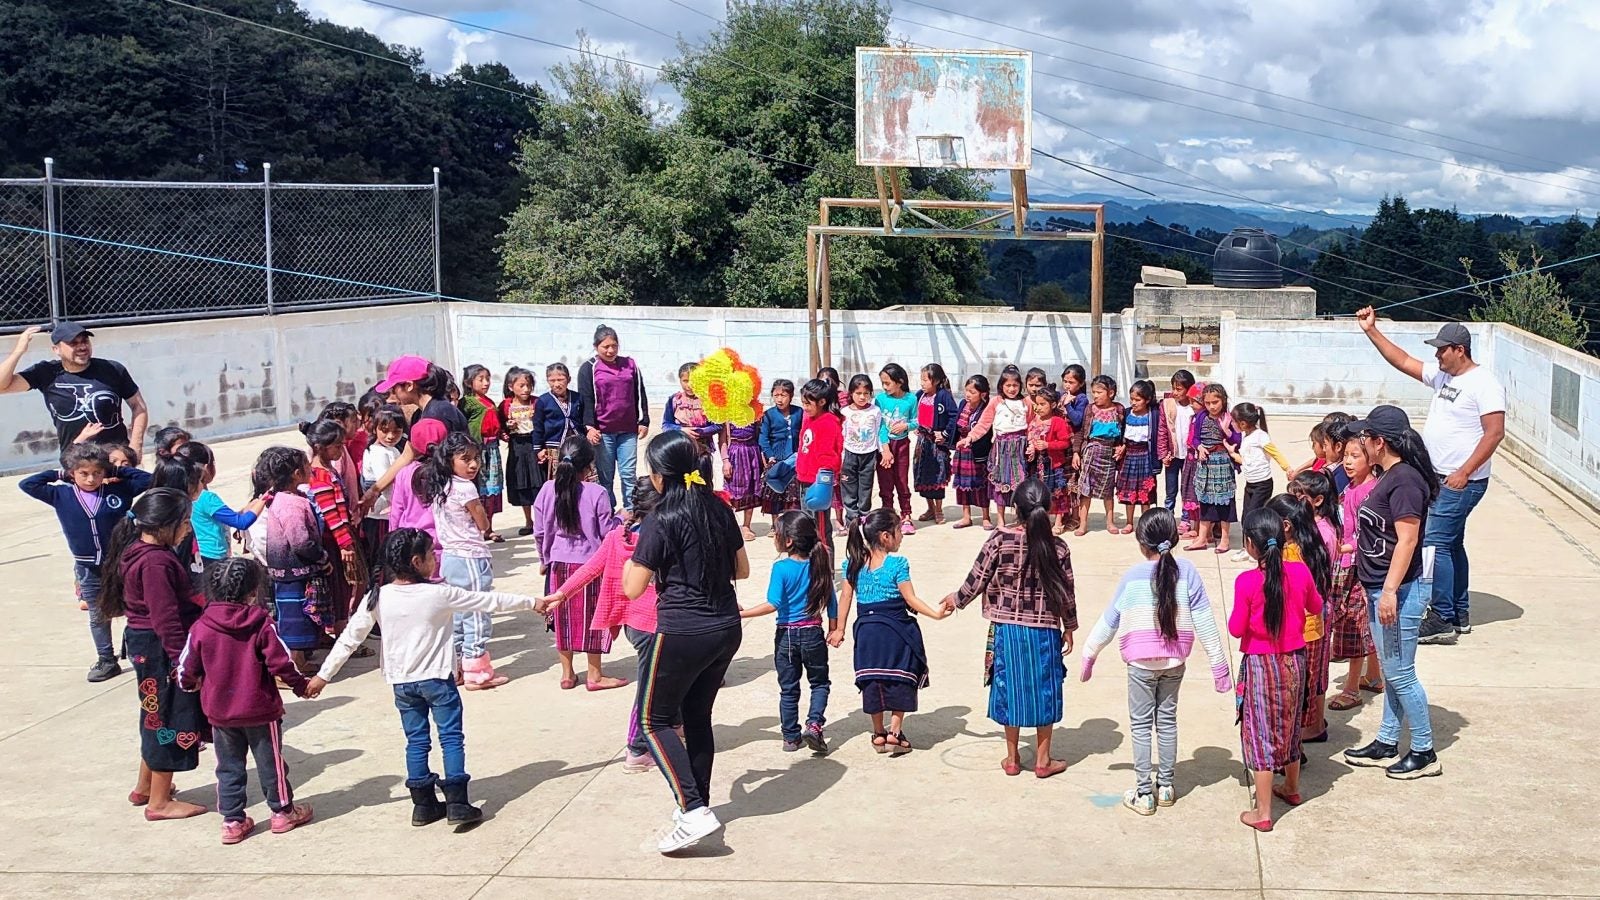 Teachers holding hands with a group of children, forming a circle and playing together outdoors.